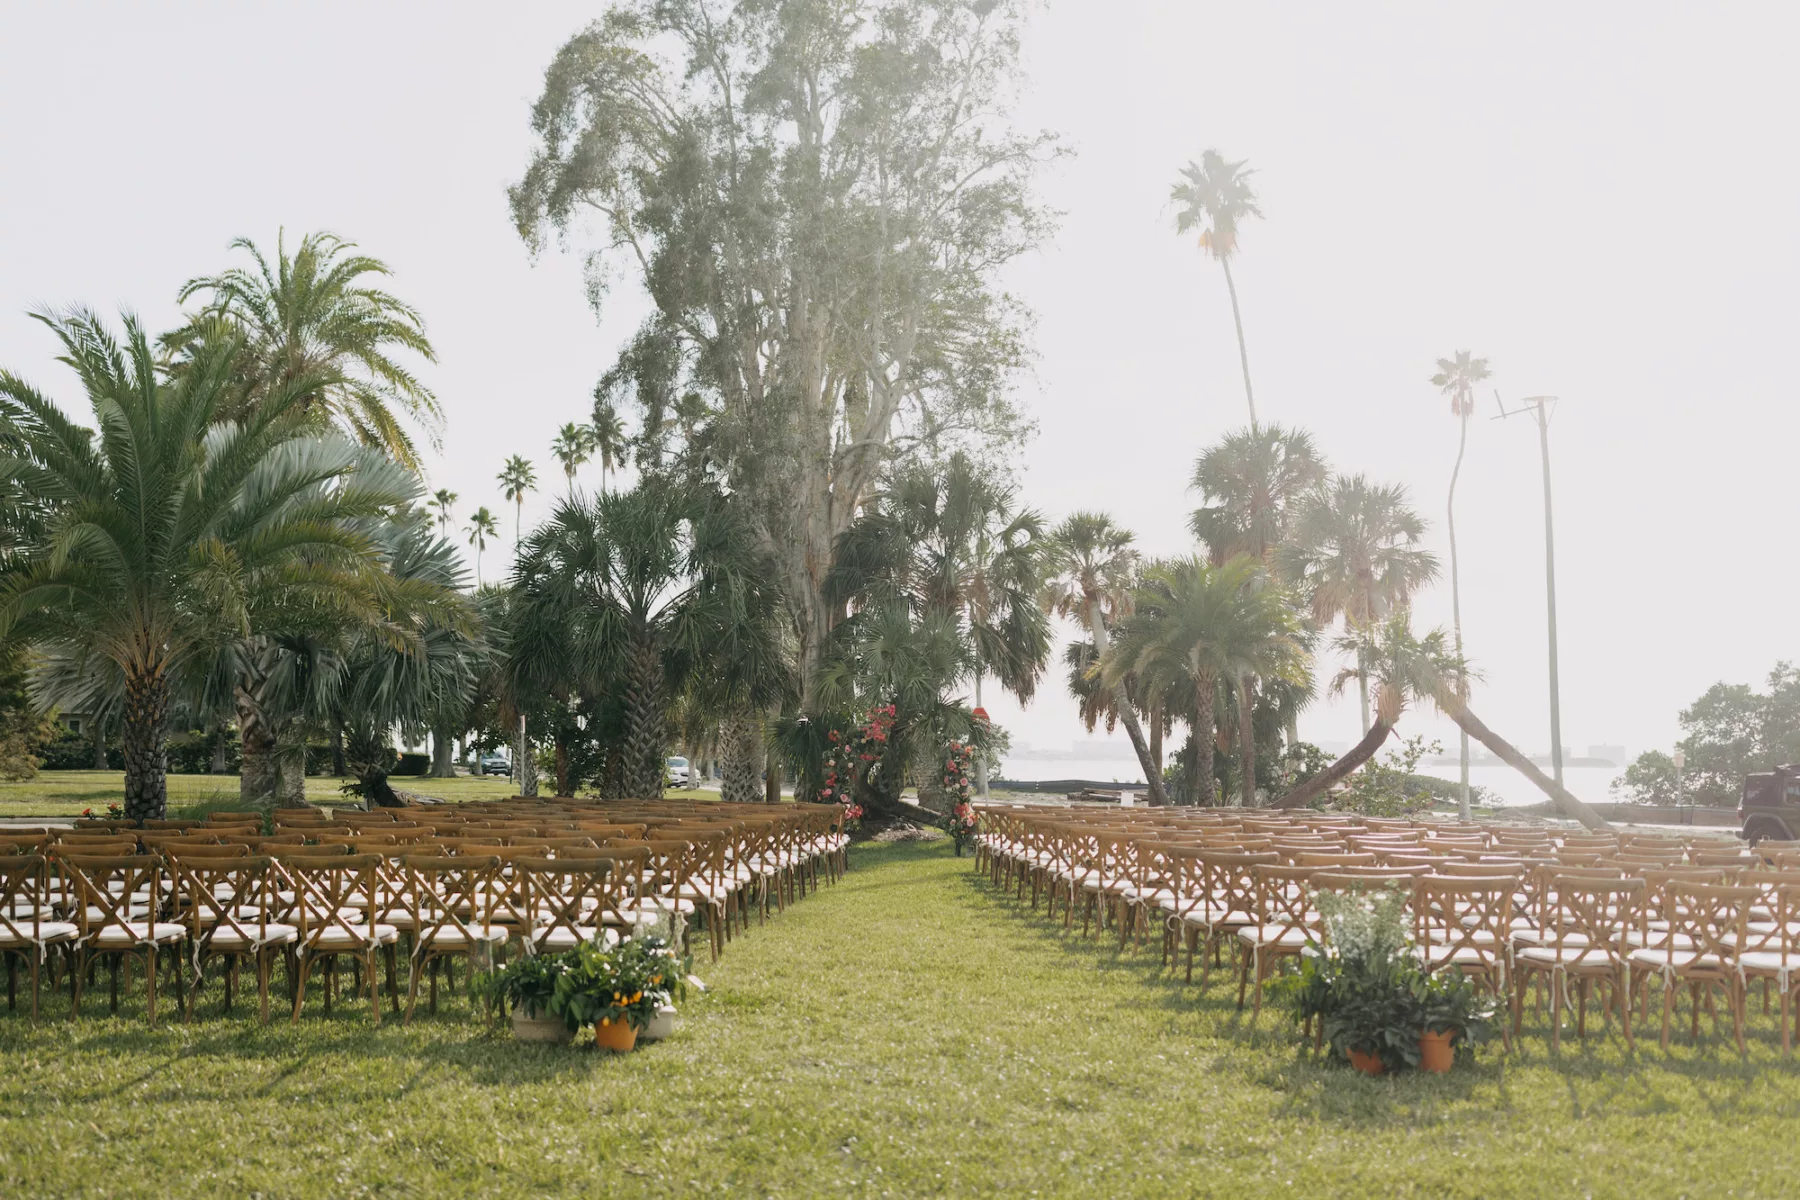 Old Florida Outdoor Wedding Ceremony Decor Ideas | Wooden Crossback Chairs with Cushions | Tampa Bay Photographer Amber McWhorter Photography | Dunedin Venue The Fenway